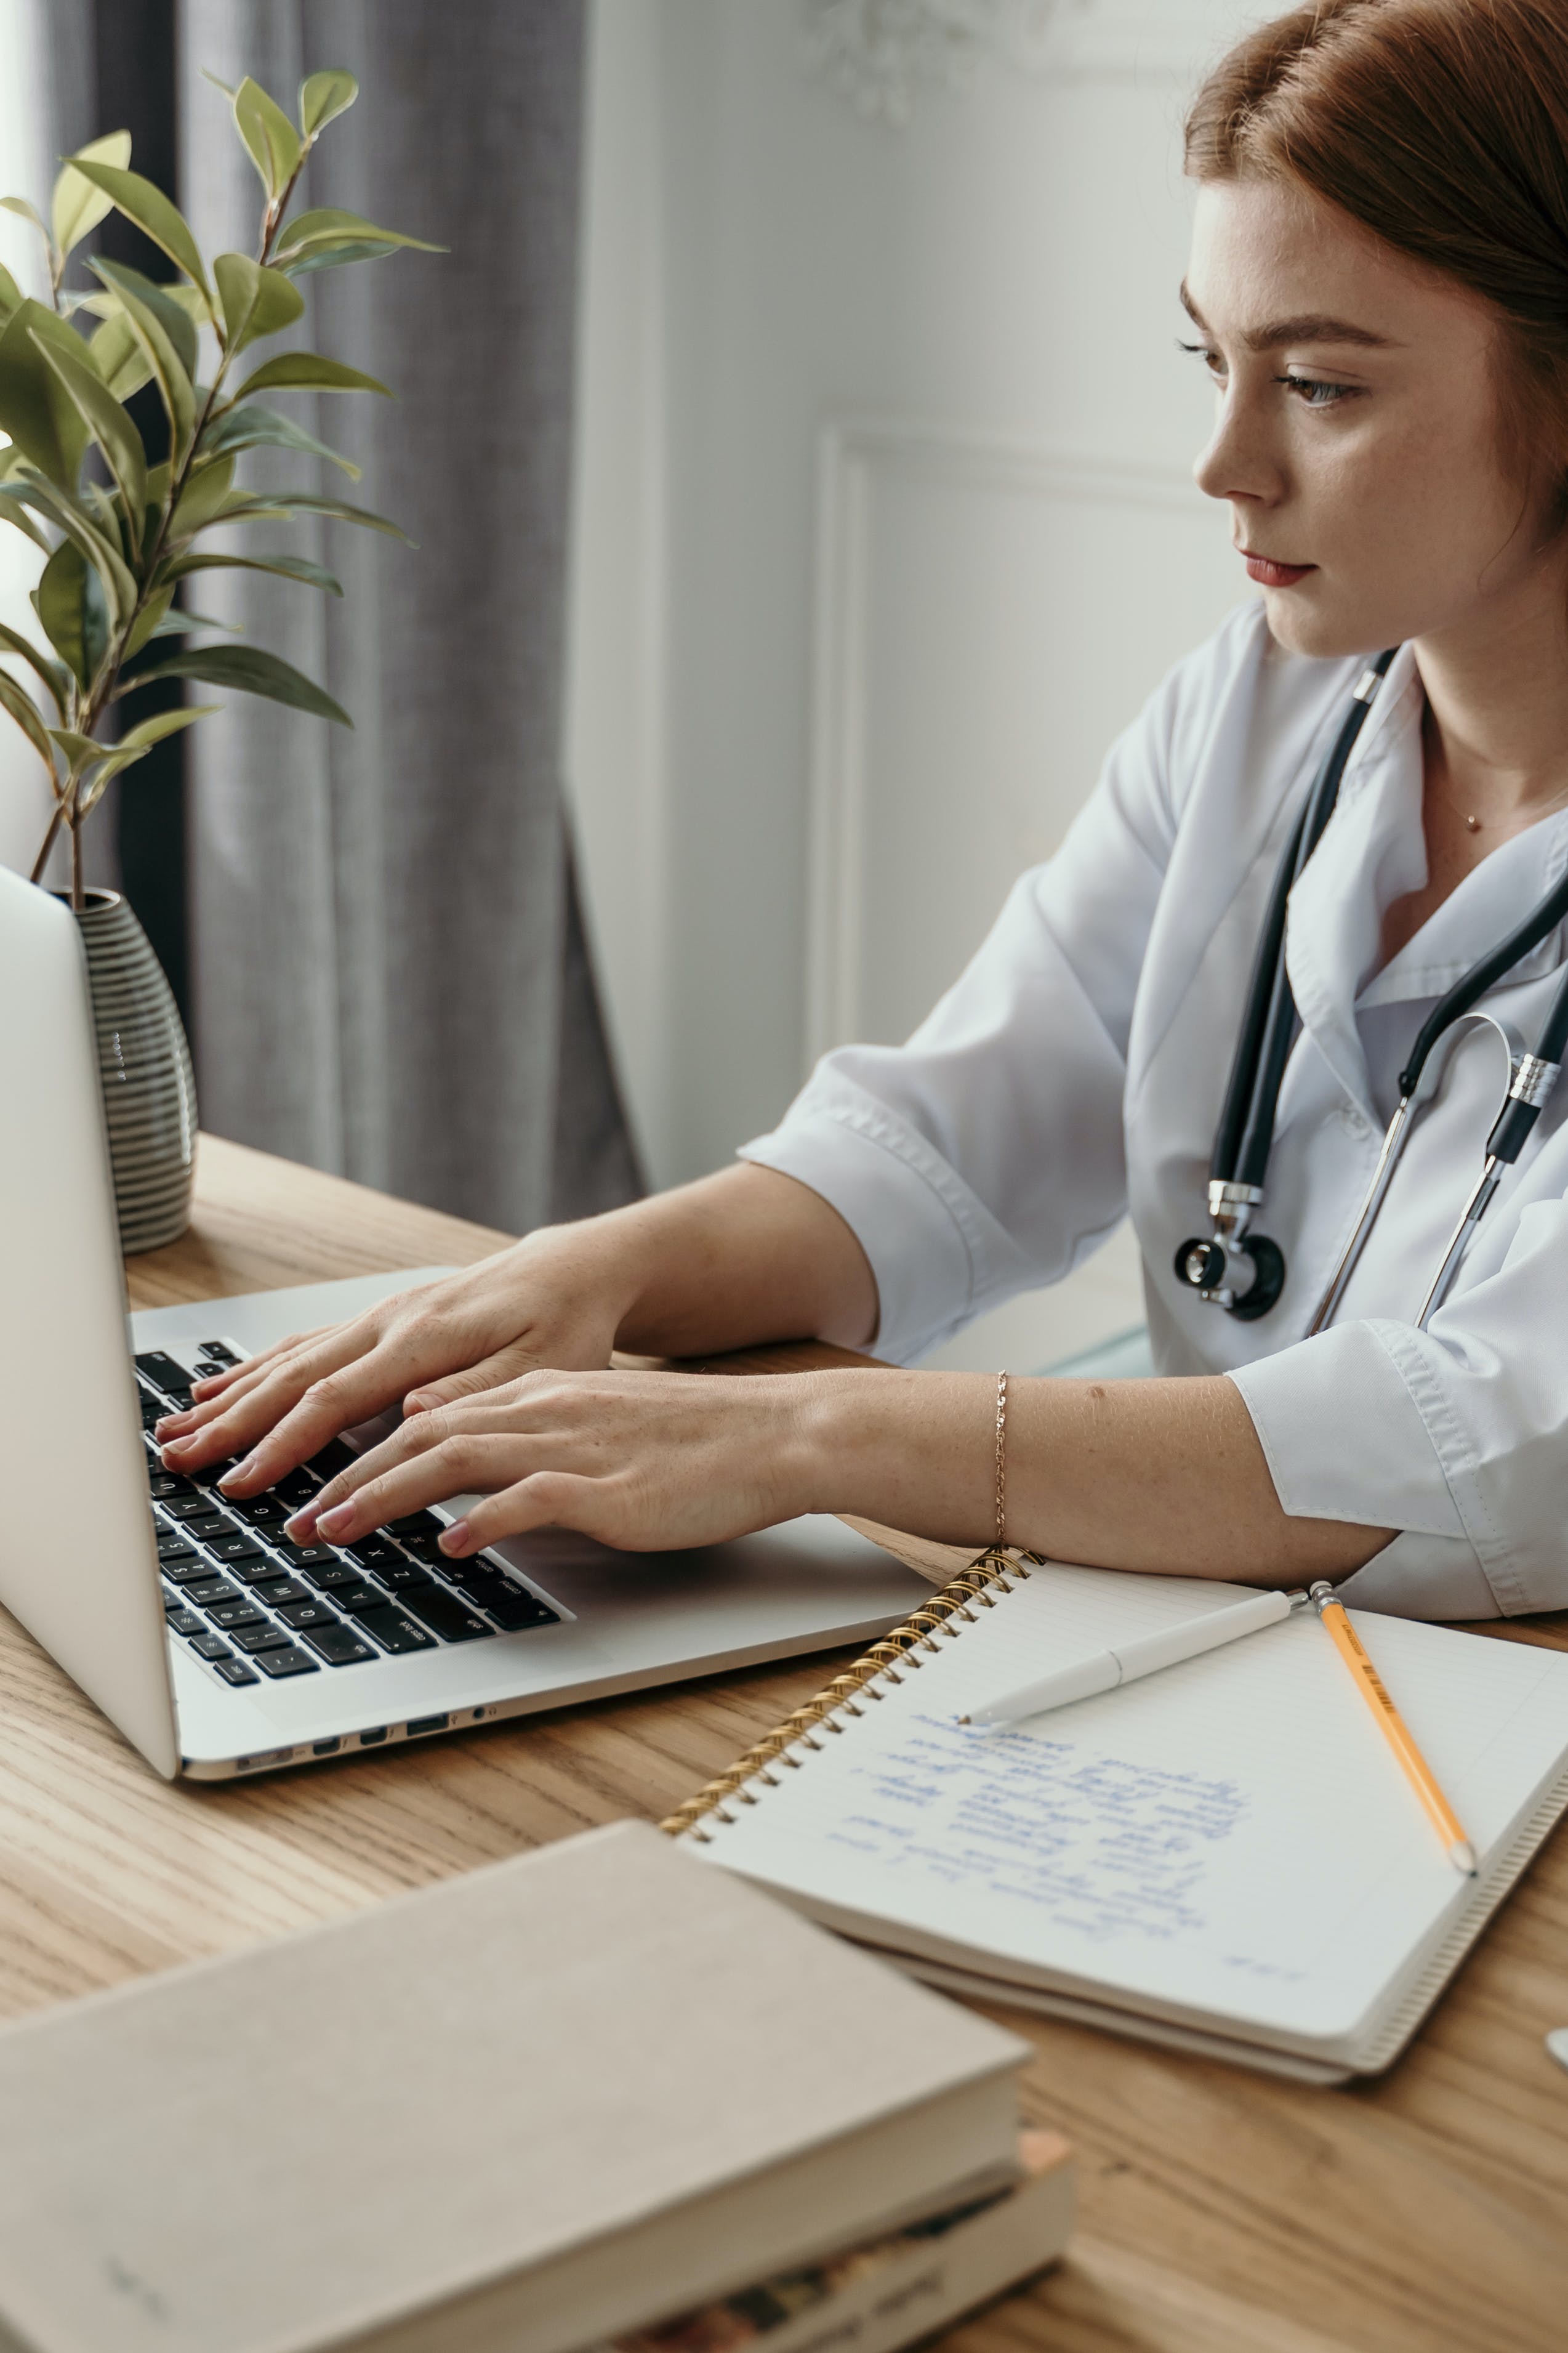 A doctor typing on her laptop. | Source: Pexels